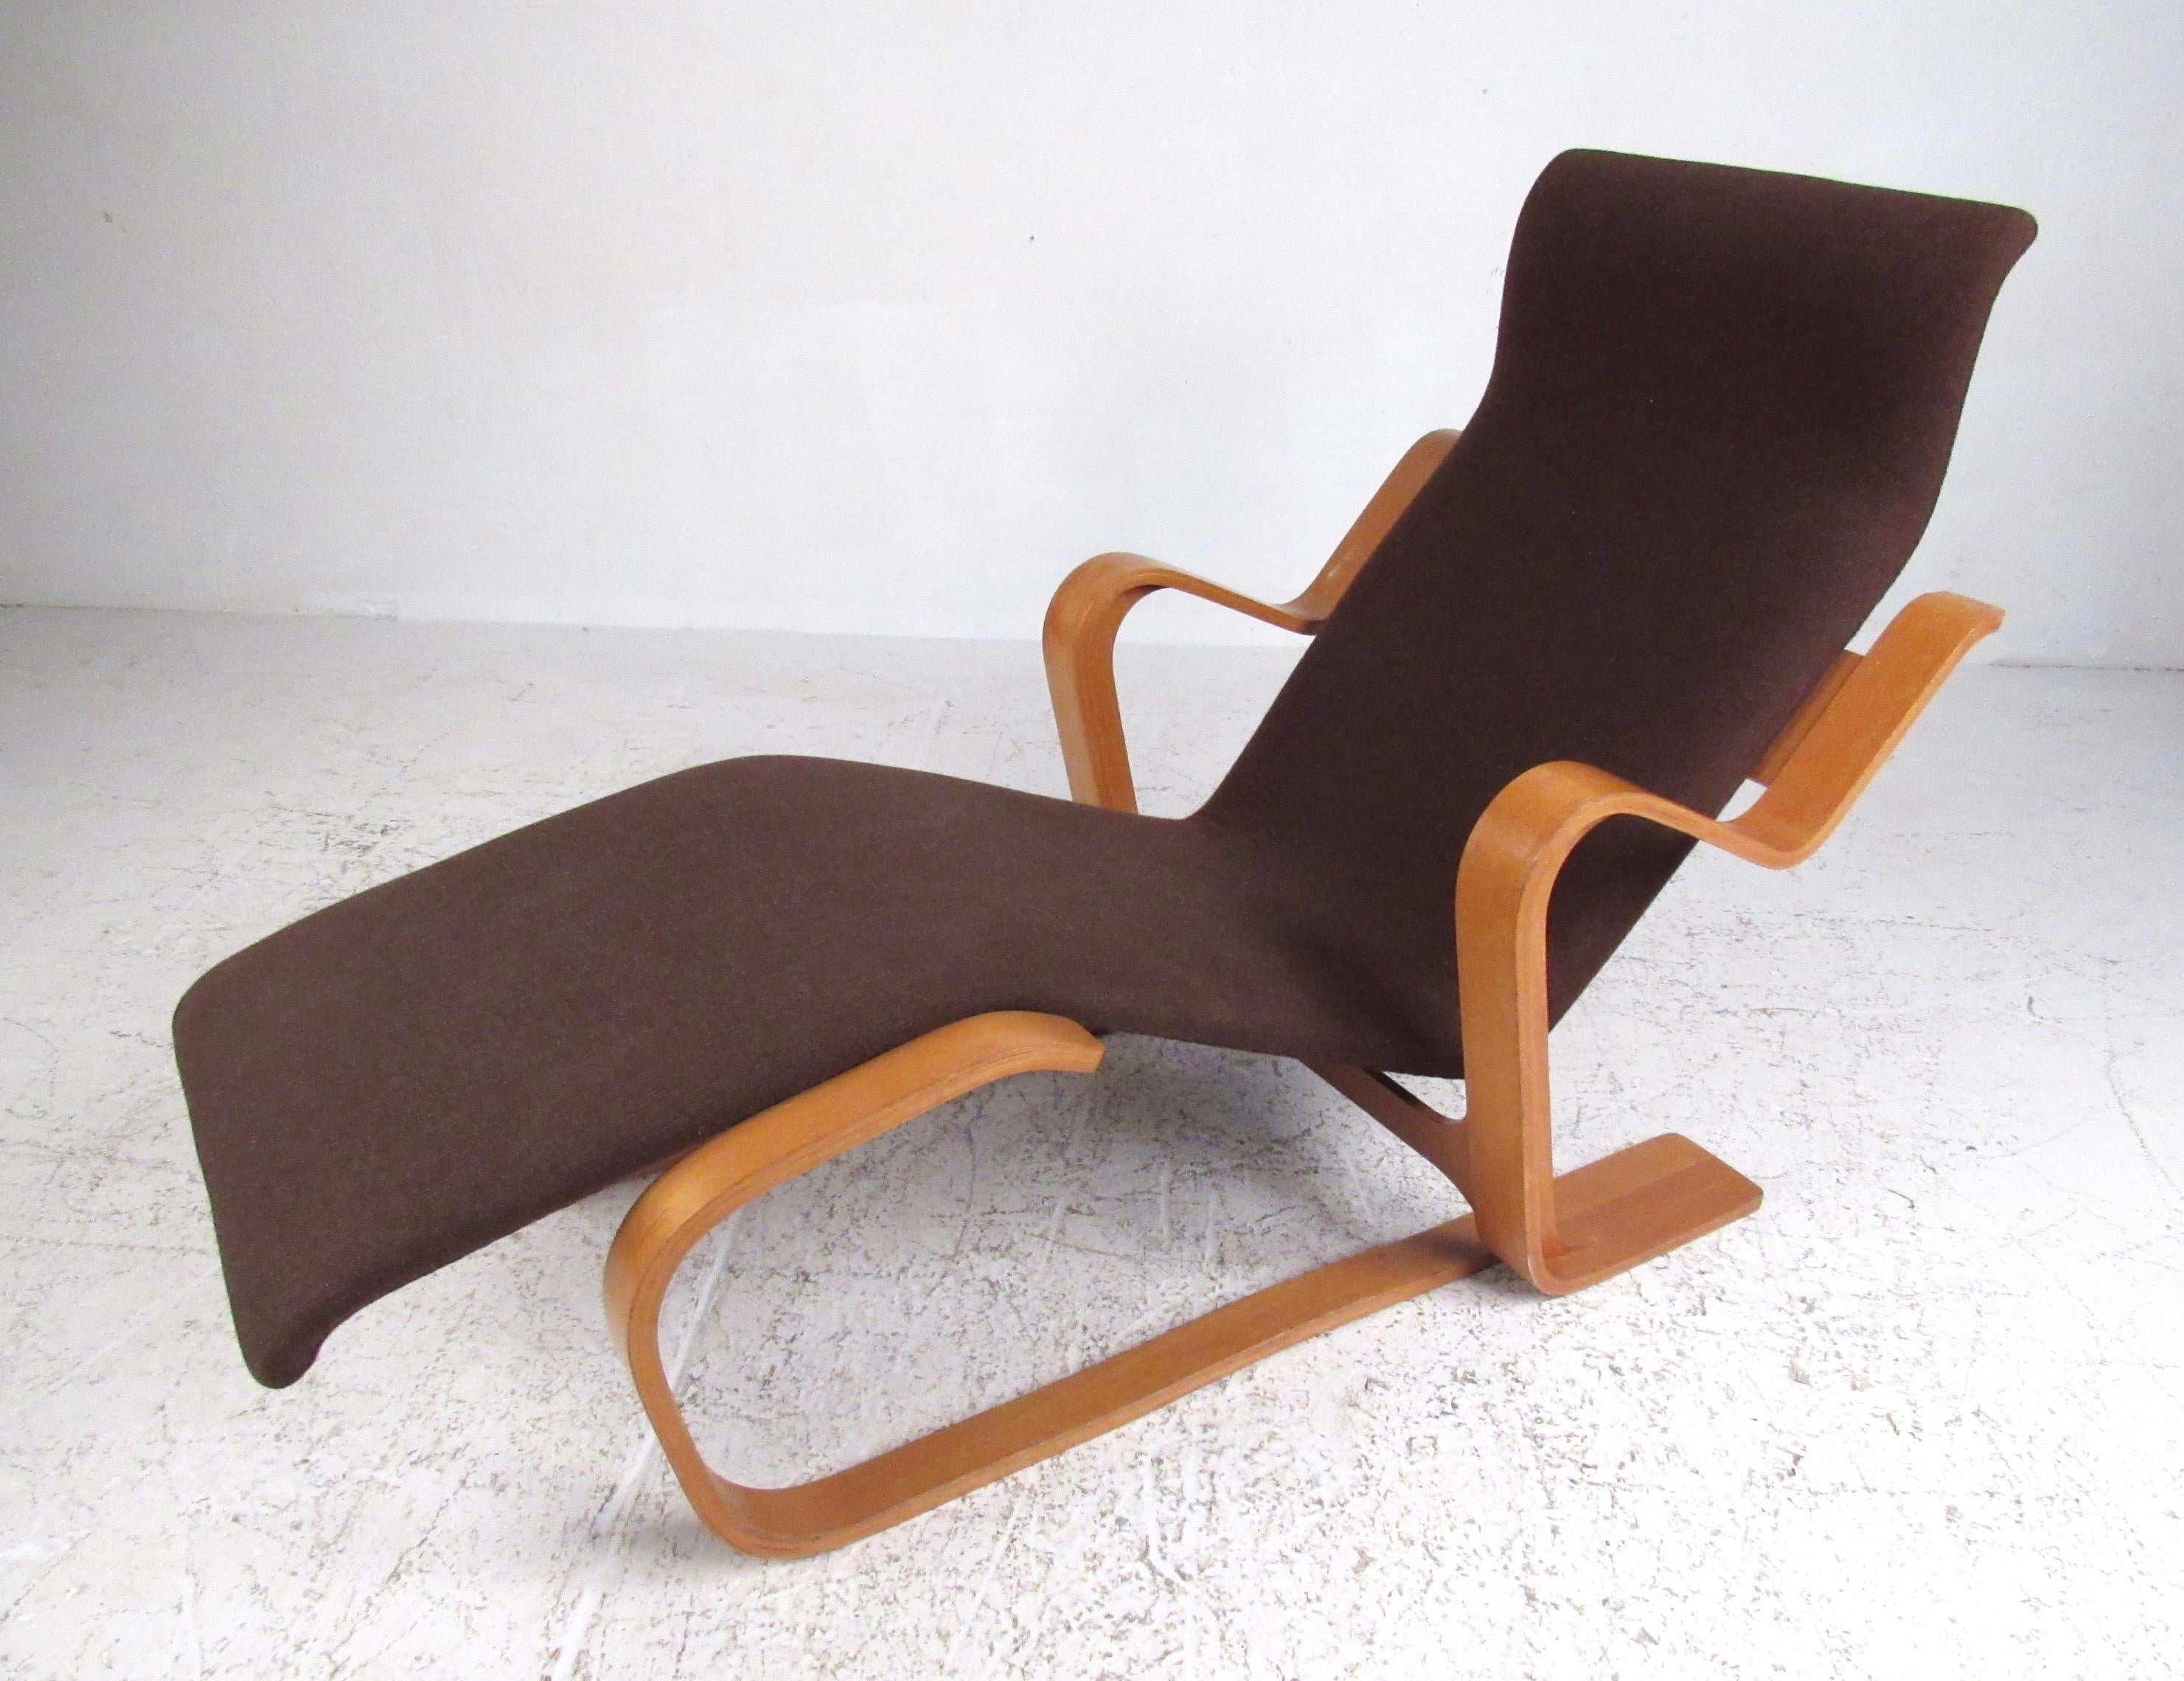 This stylish bentwood lounge chair features quality Mid-Century Modern construction and distinctive Scandinavian design. Comfortable ergonomic reclined seating is enhanced by the Danish modern style, perfect modern chaise longue for any interior.